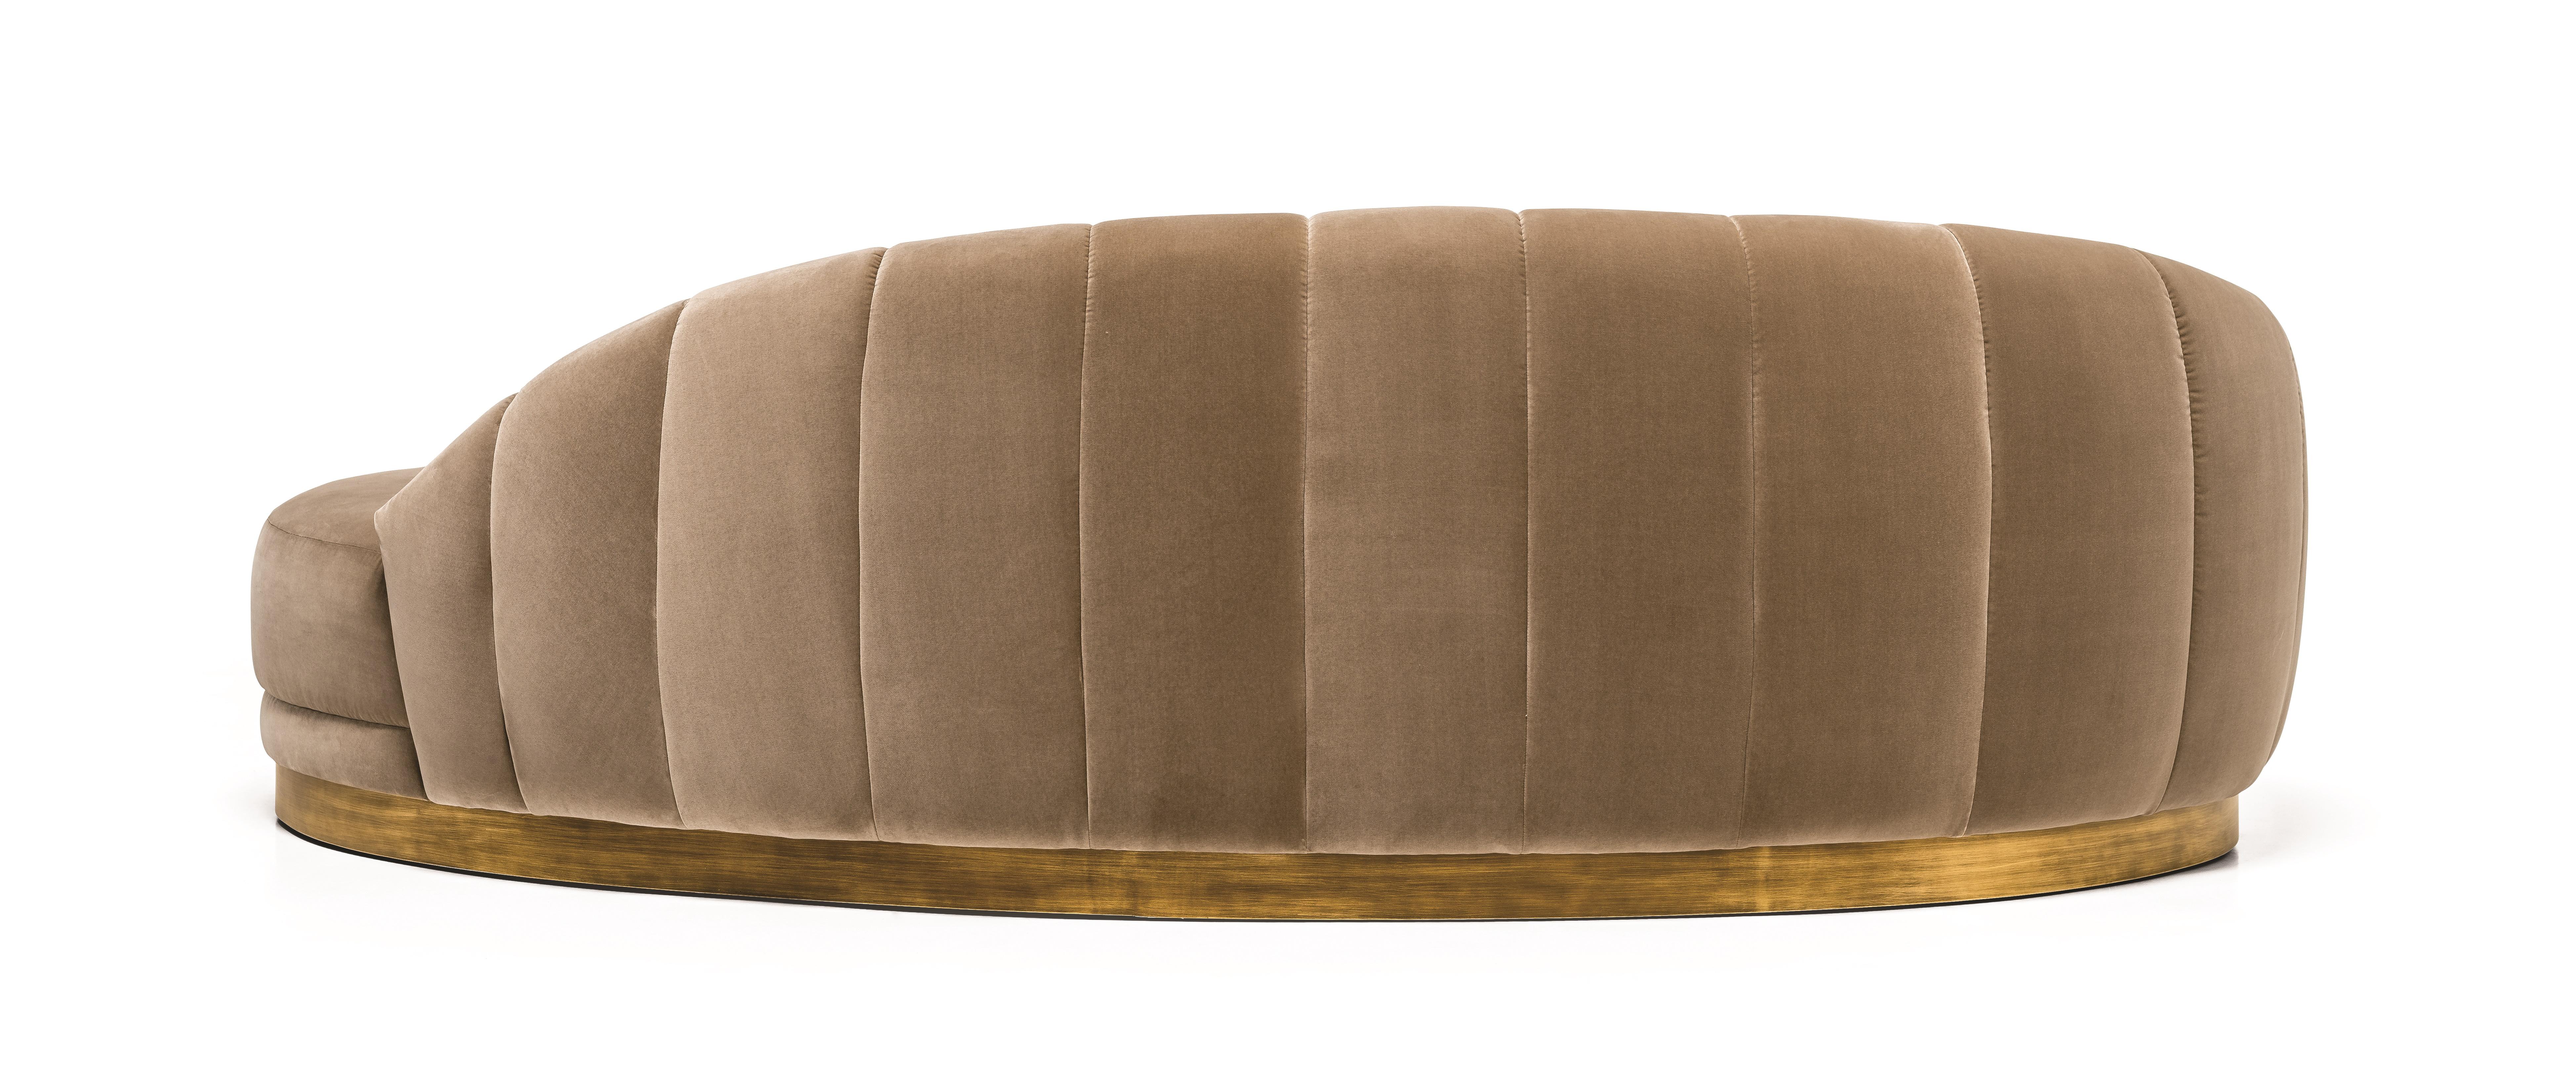 Contemporary retro style sofa in beige latte velvet.
Plinth antique brushed brass.
All hardwood frame with interlocking construction.
Advanced comfort spring suspension.
Tight seat and back with premium polyurethane foam with generous multi-density